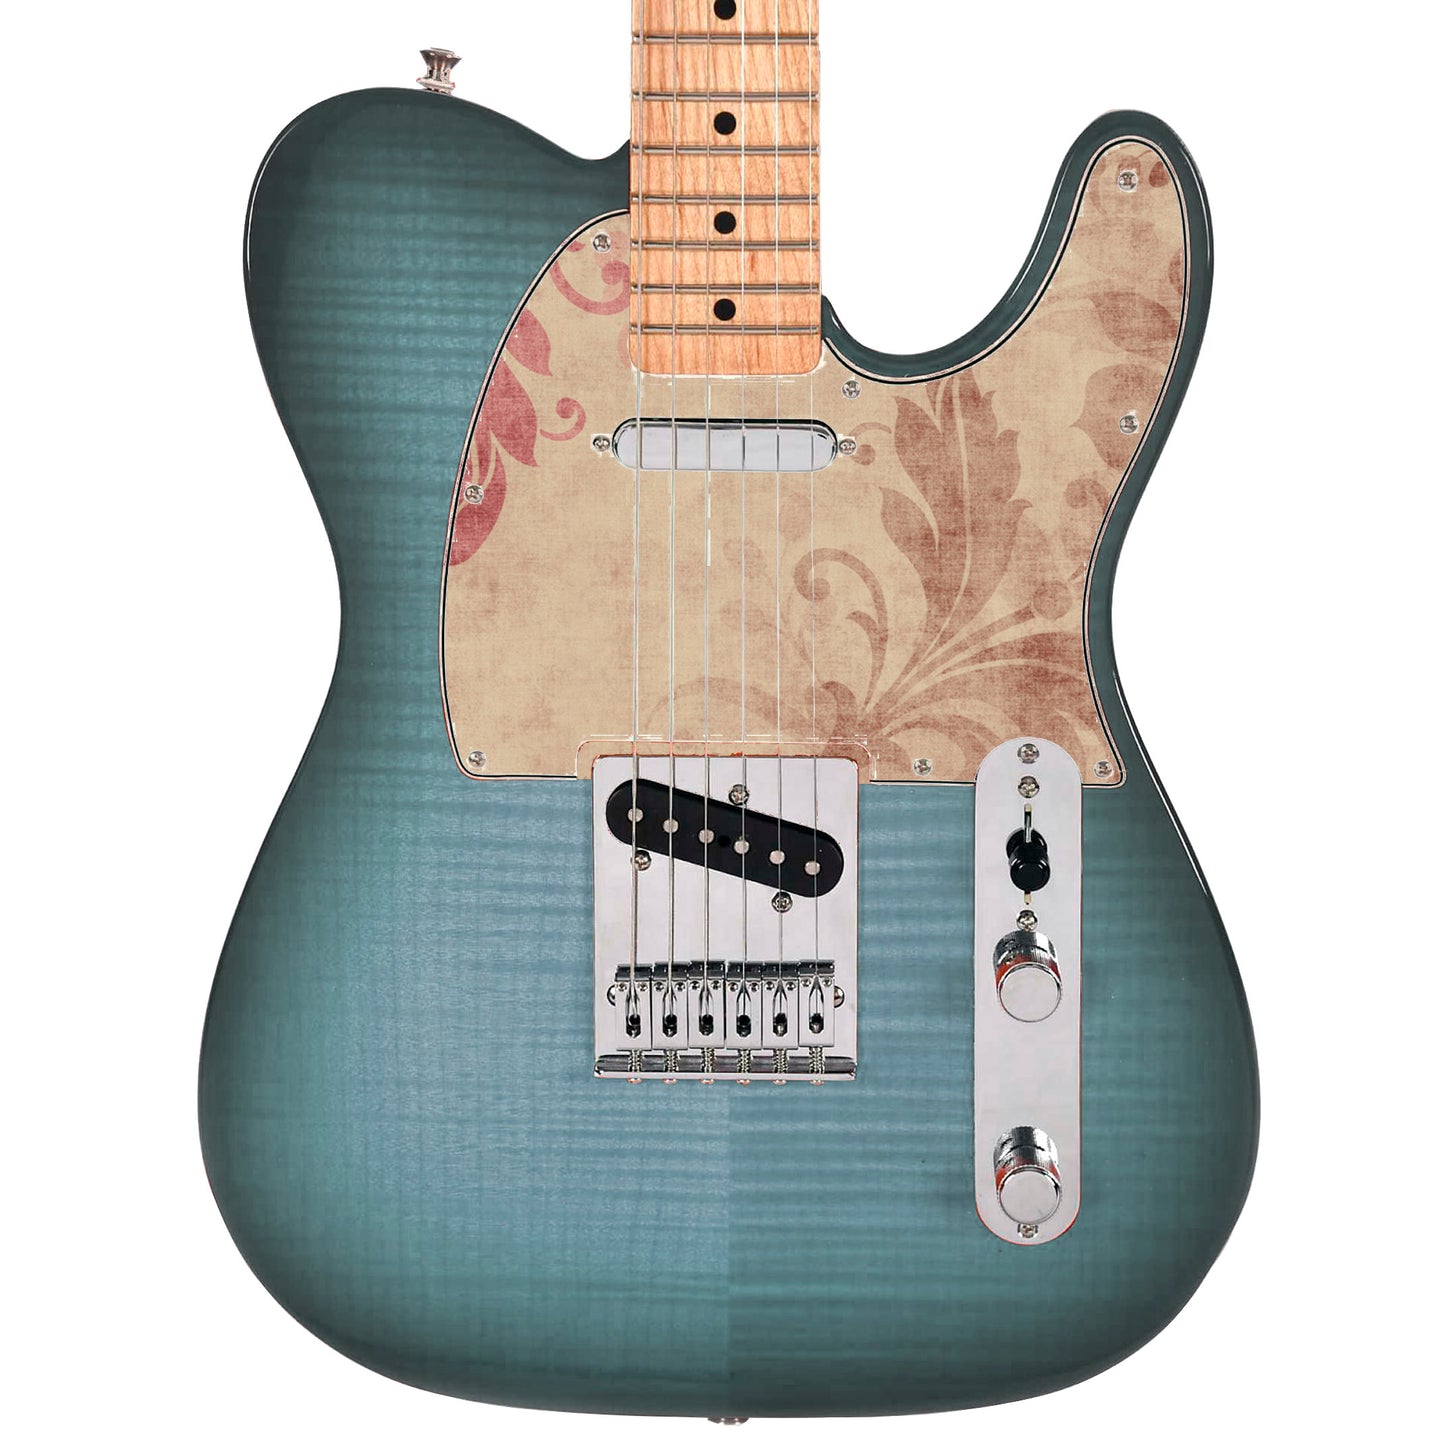 Guitar Custom PickGuard Sticker Skins. Customise your own existing Pickguard, Headstock, Tremolo Cover plate. The Quilted Patches PK02